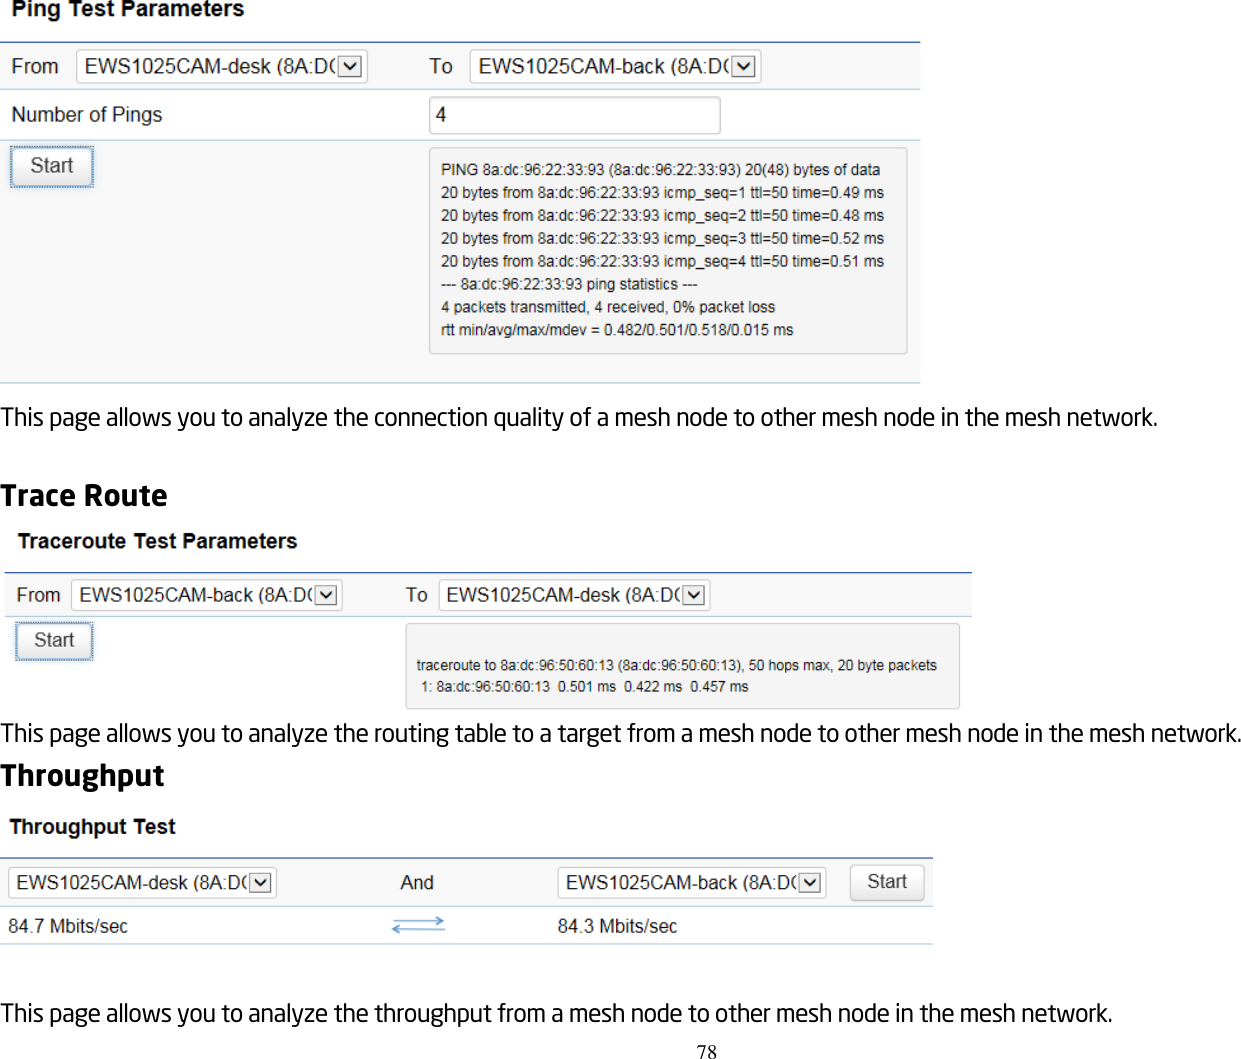 78   This page allows you to analyze the connection quality of a mesh node to other mesh node in the mesh network.  Trace Route  This page allows you to analyze the routing table to a target from a mesh node to other mesh node in the mesh network. Throughput   This page allows you to analyze the throughput from a mesh node to other mesh node in the mesh network. 